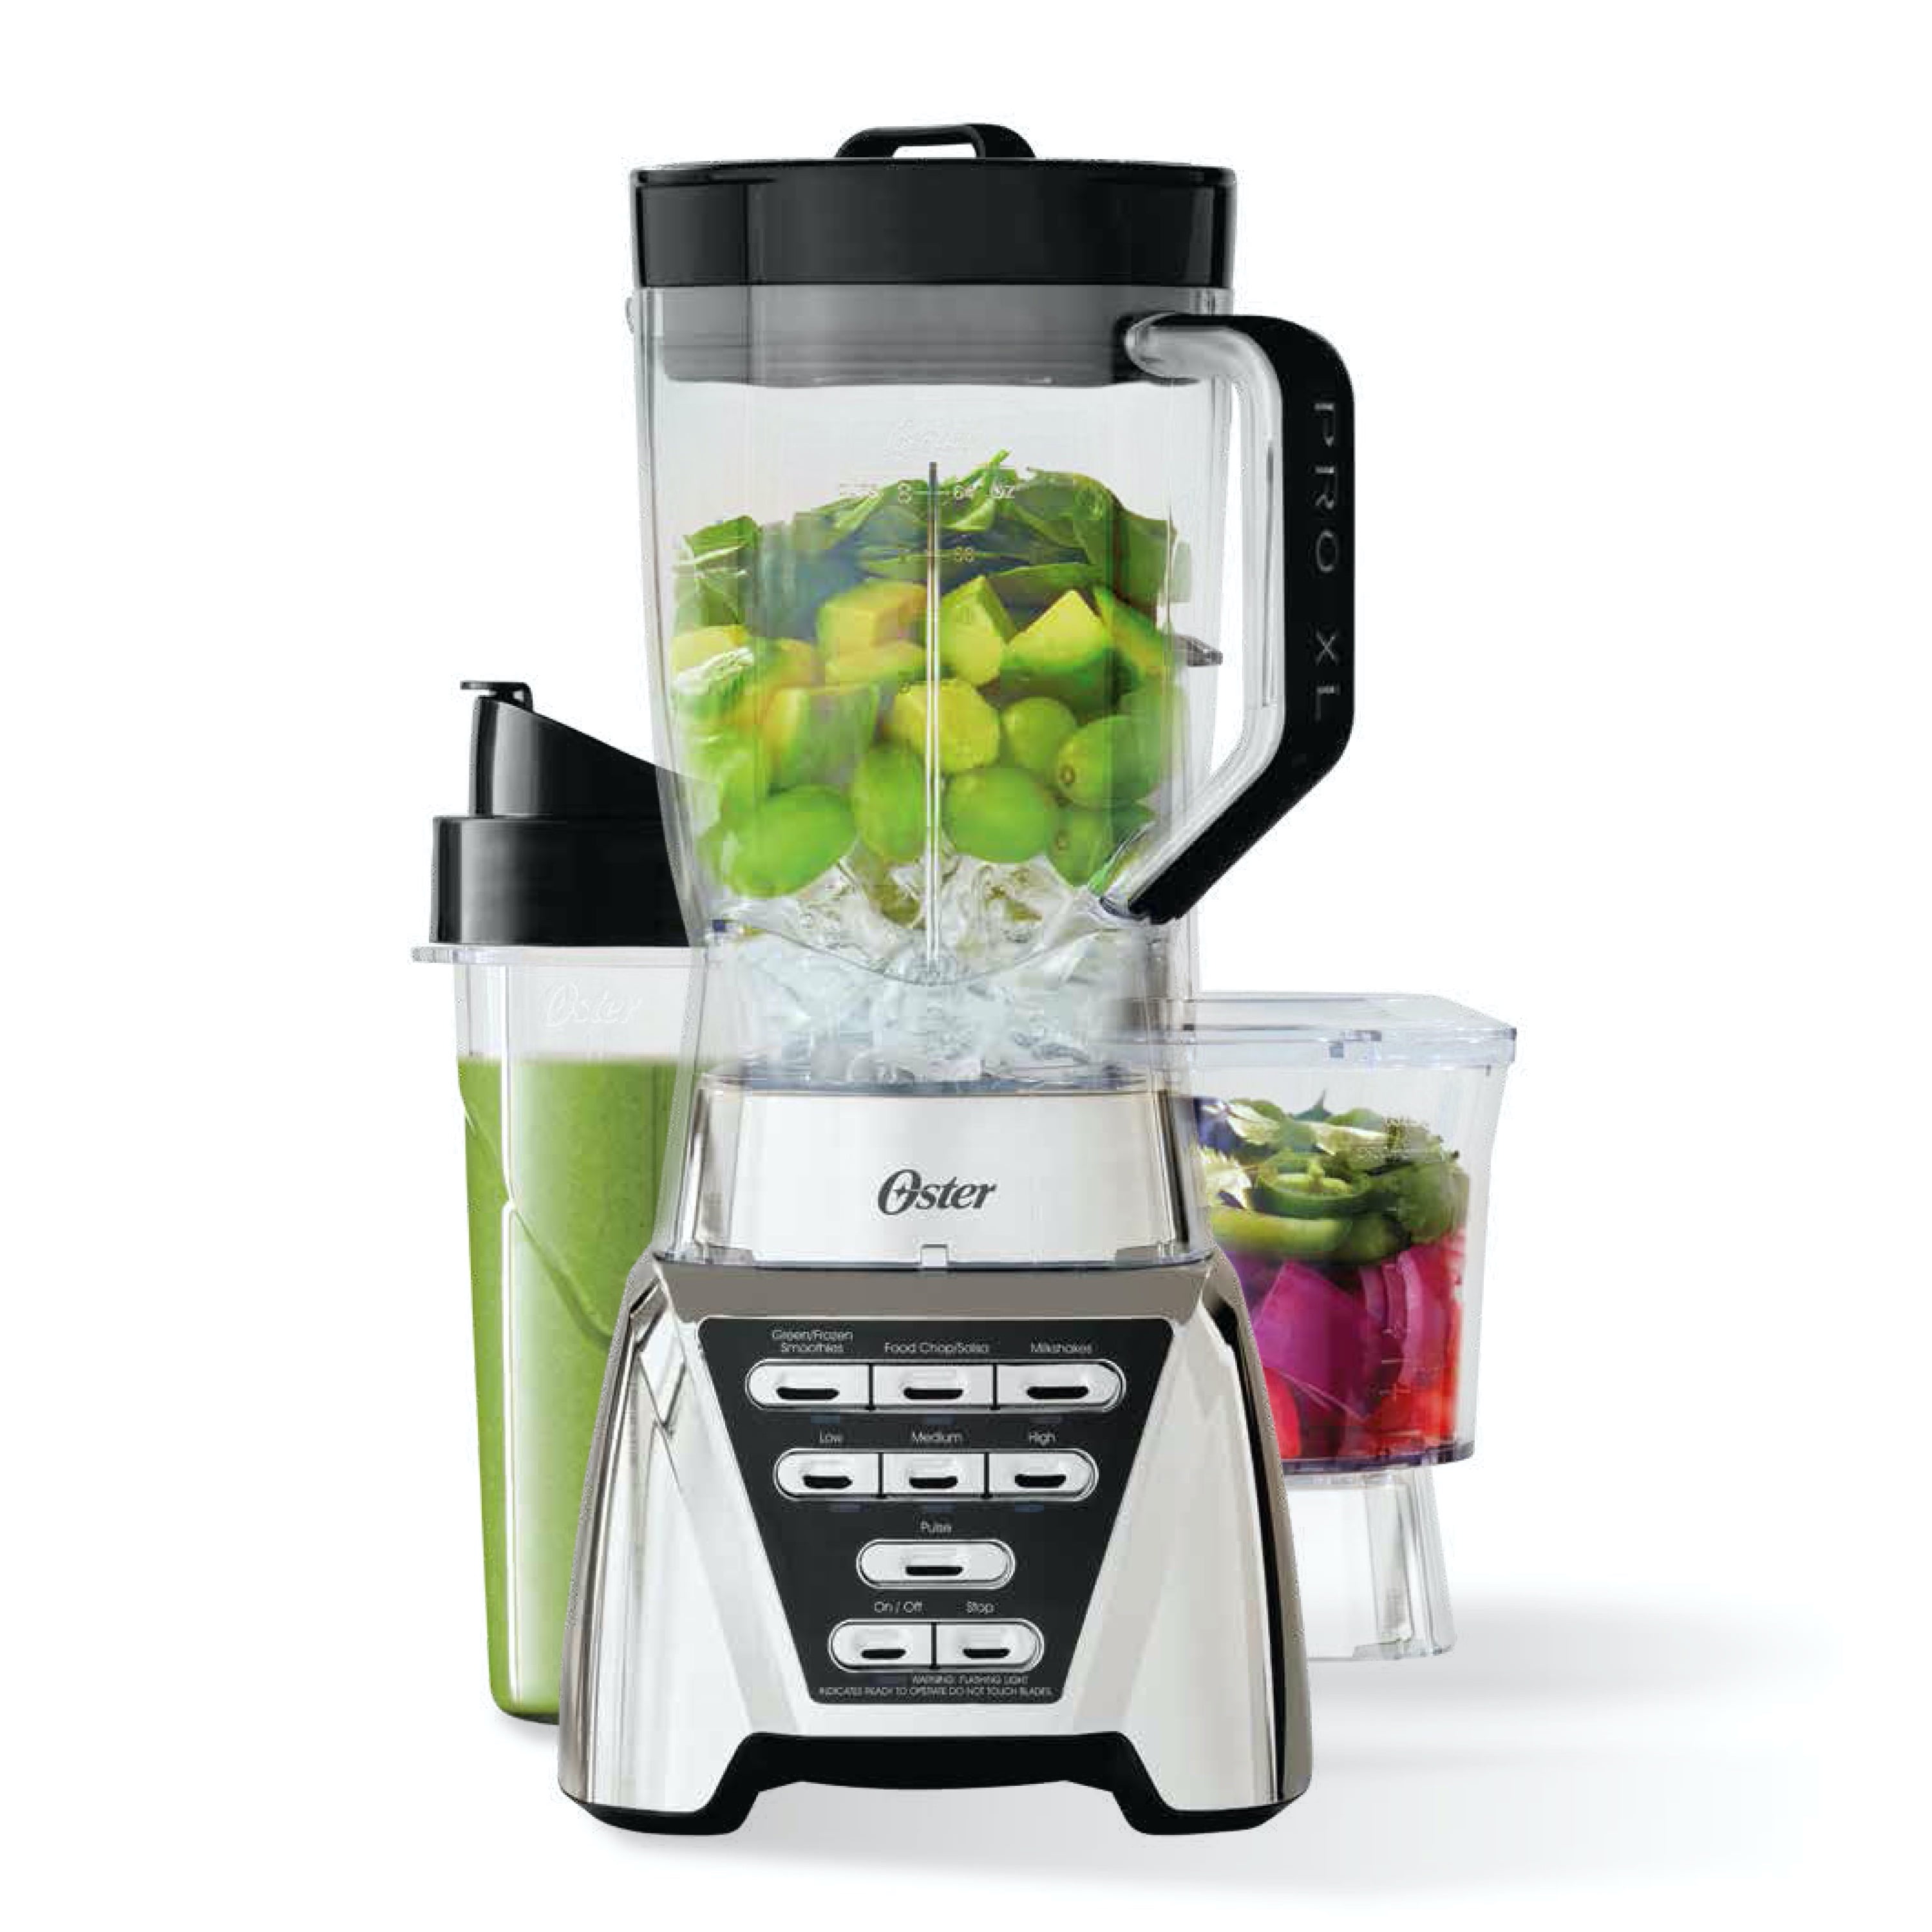 Oster Pro 1200 Plus 2-in-1 64 oz. 7-Speed Countertop Blender and